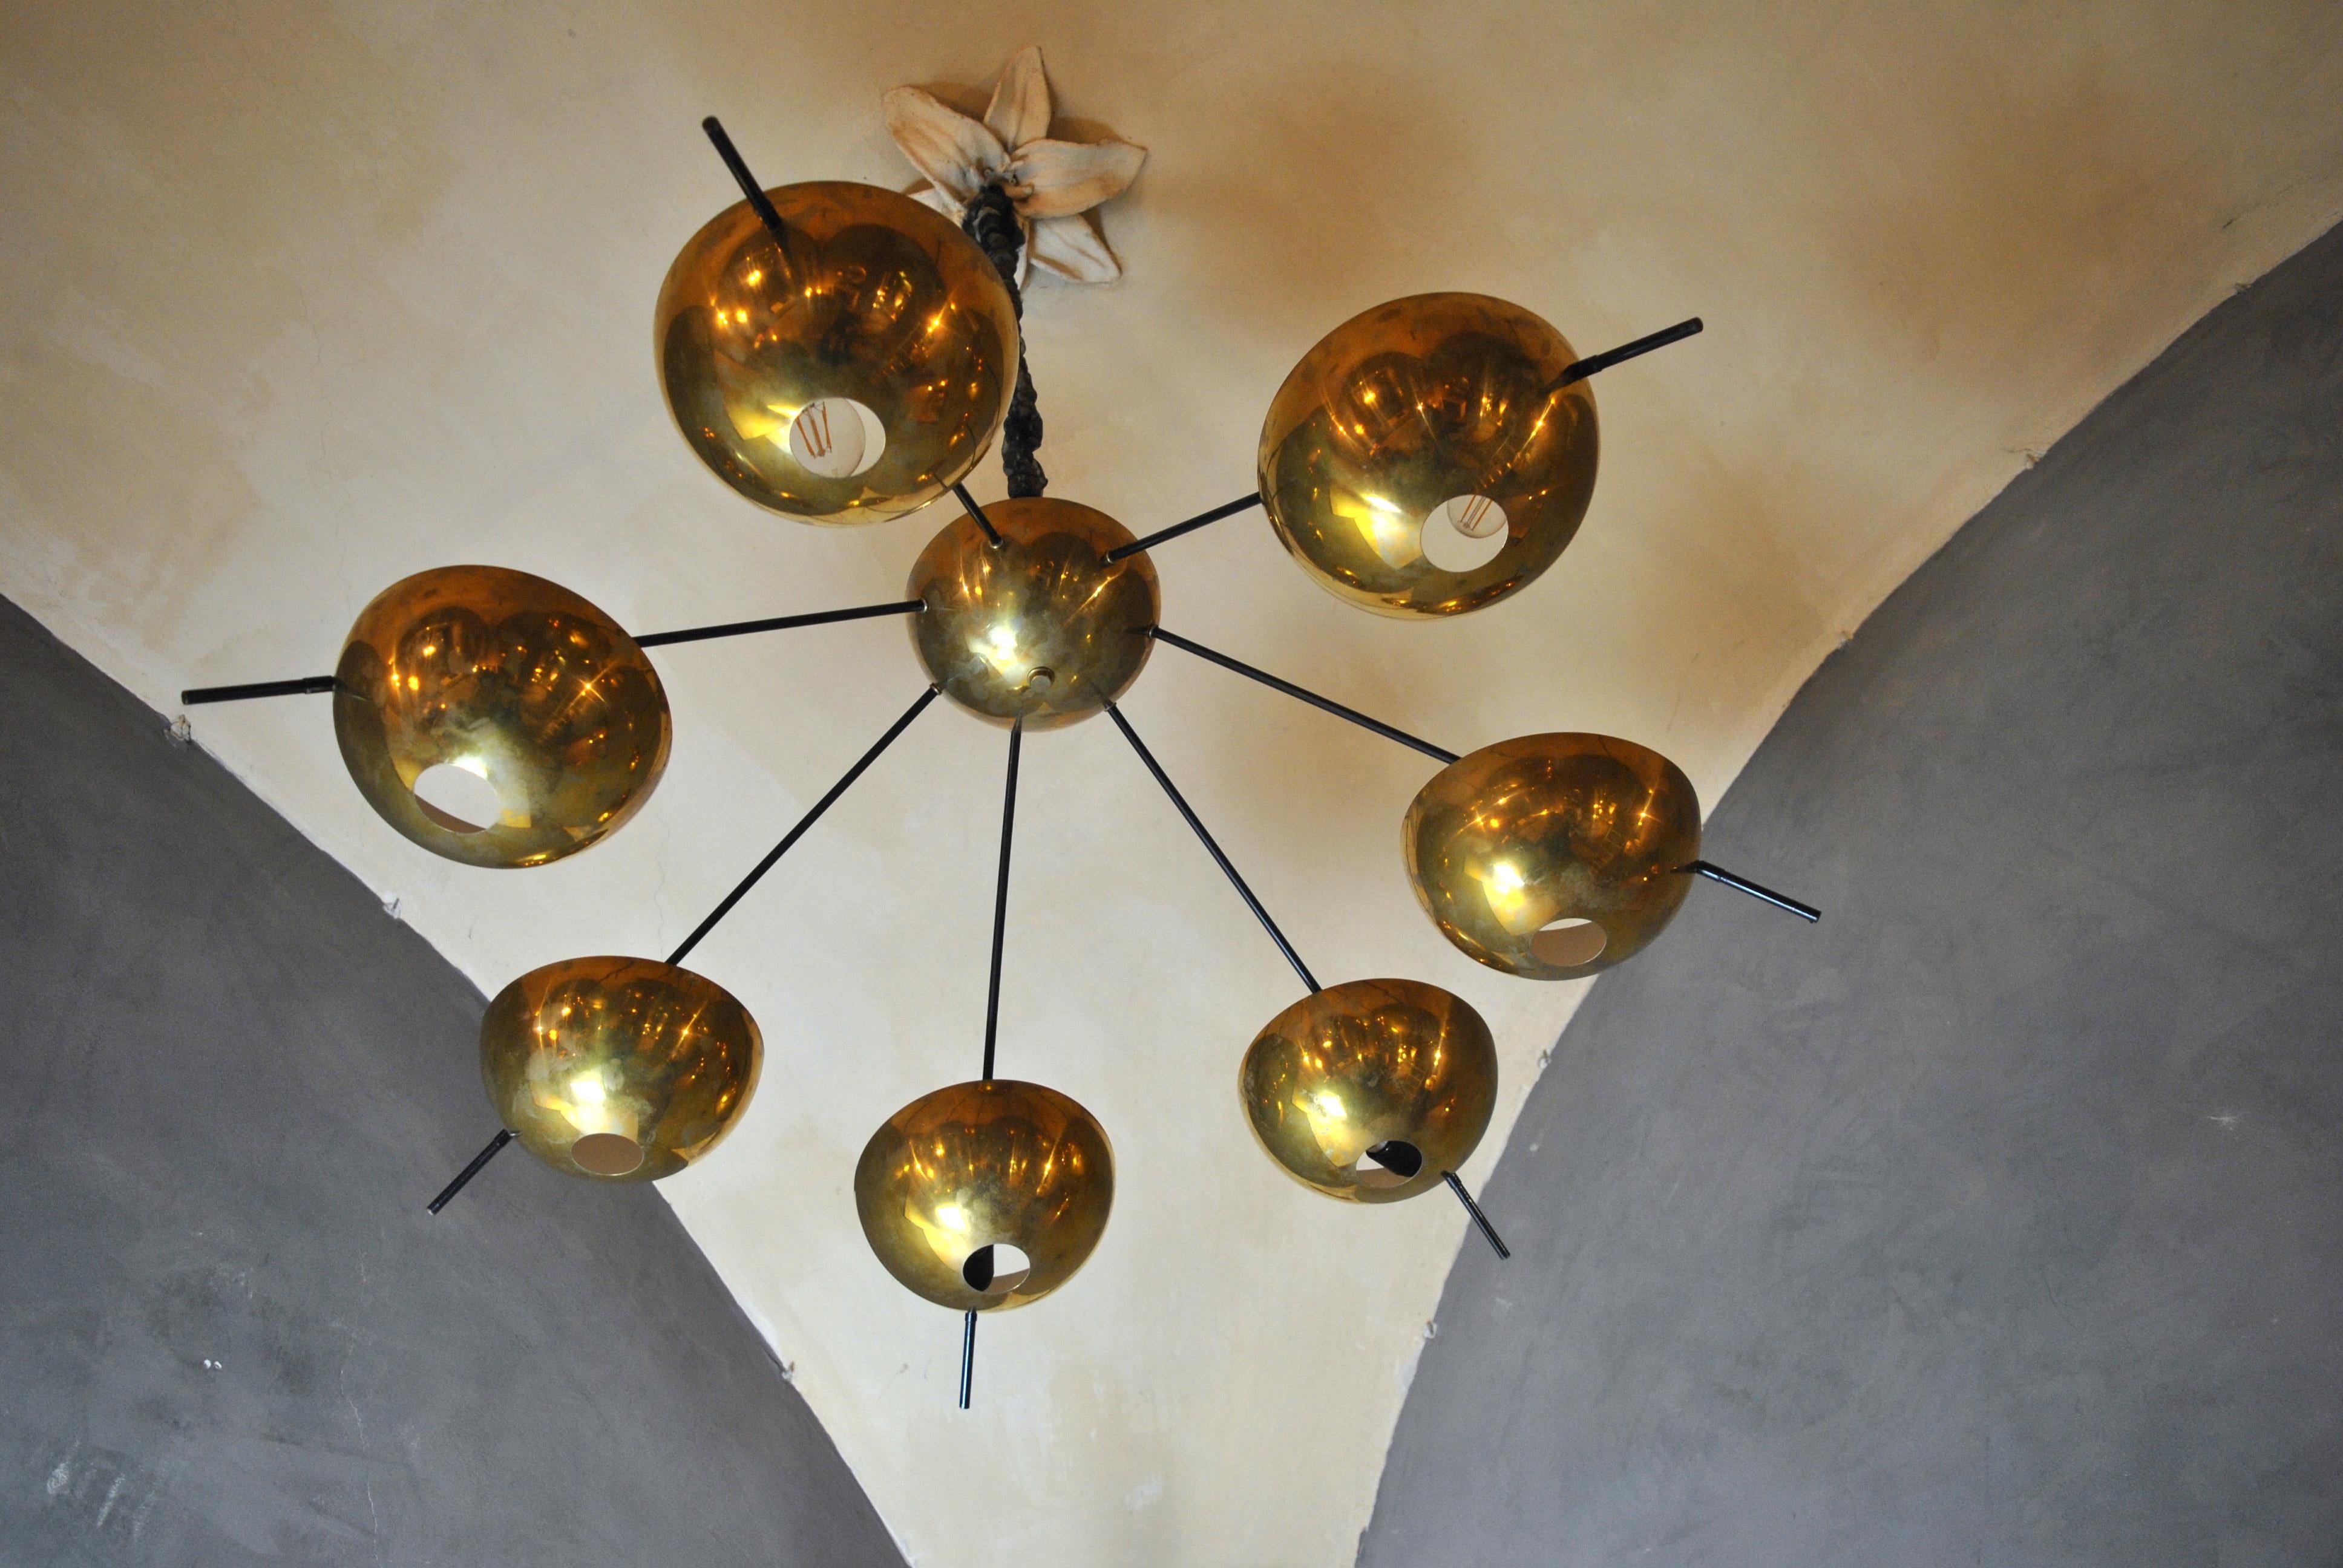 Italian suspension chandelier designed by Cellule Creative Studio for Misia Arte with brass cups and structure in iron and painted aluminum. Recalls the Italian design of the 1950s like Stilux, Arredoluce and Stilnovo.
Measures: D 125 cm, H 75 cm,